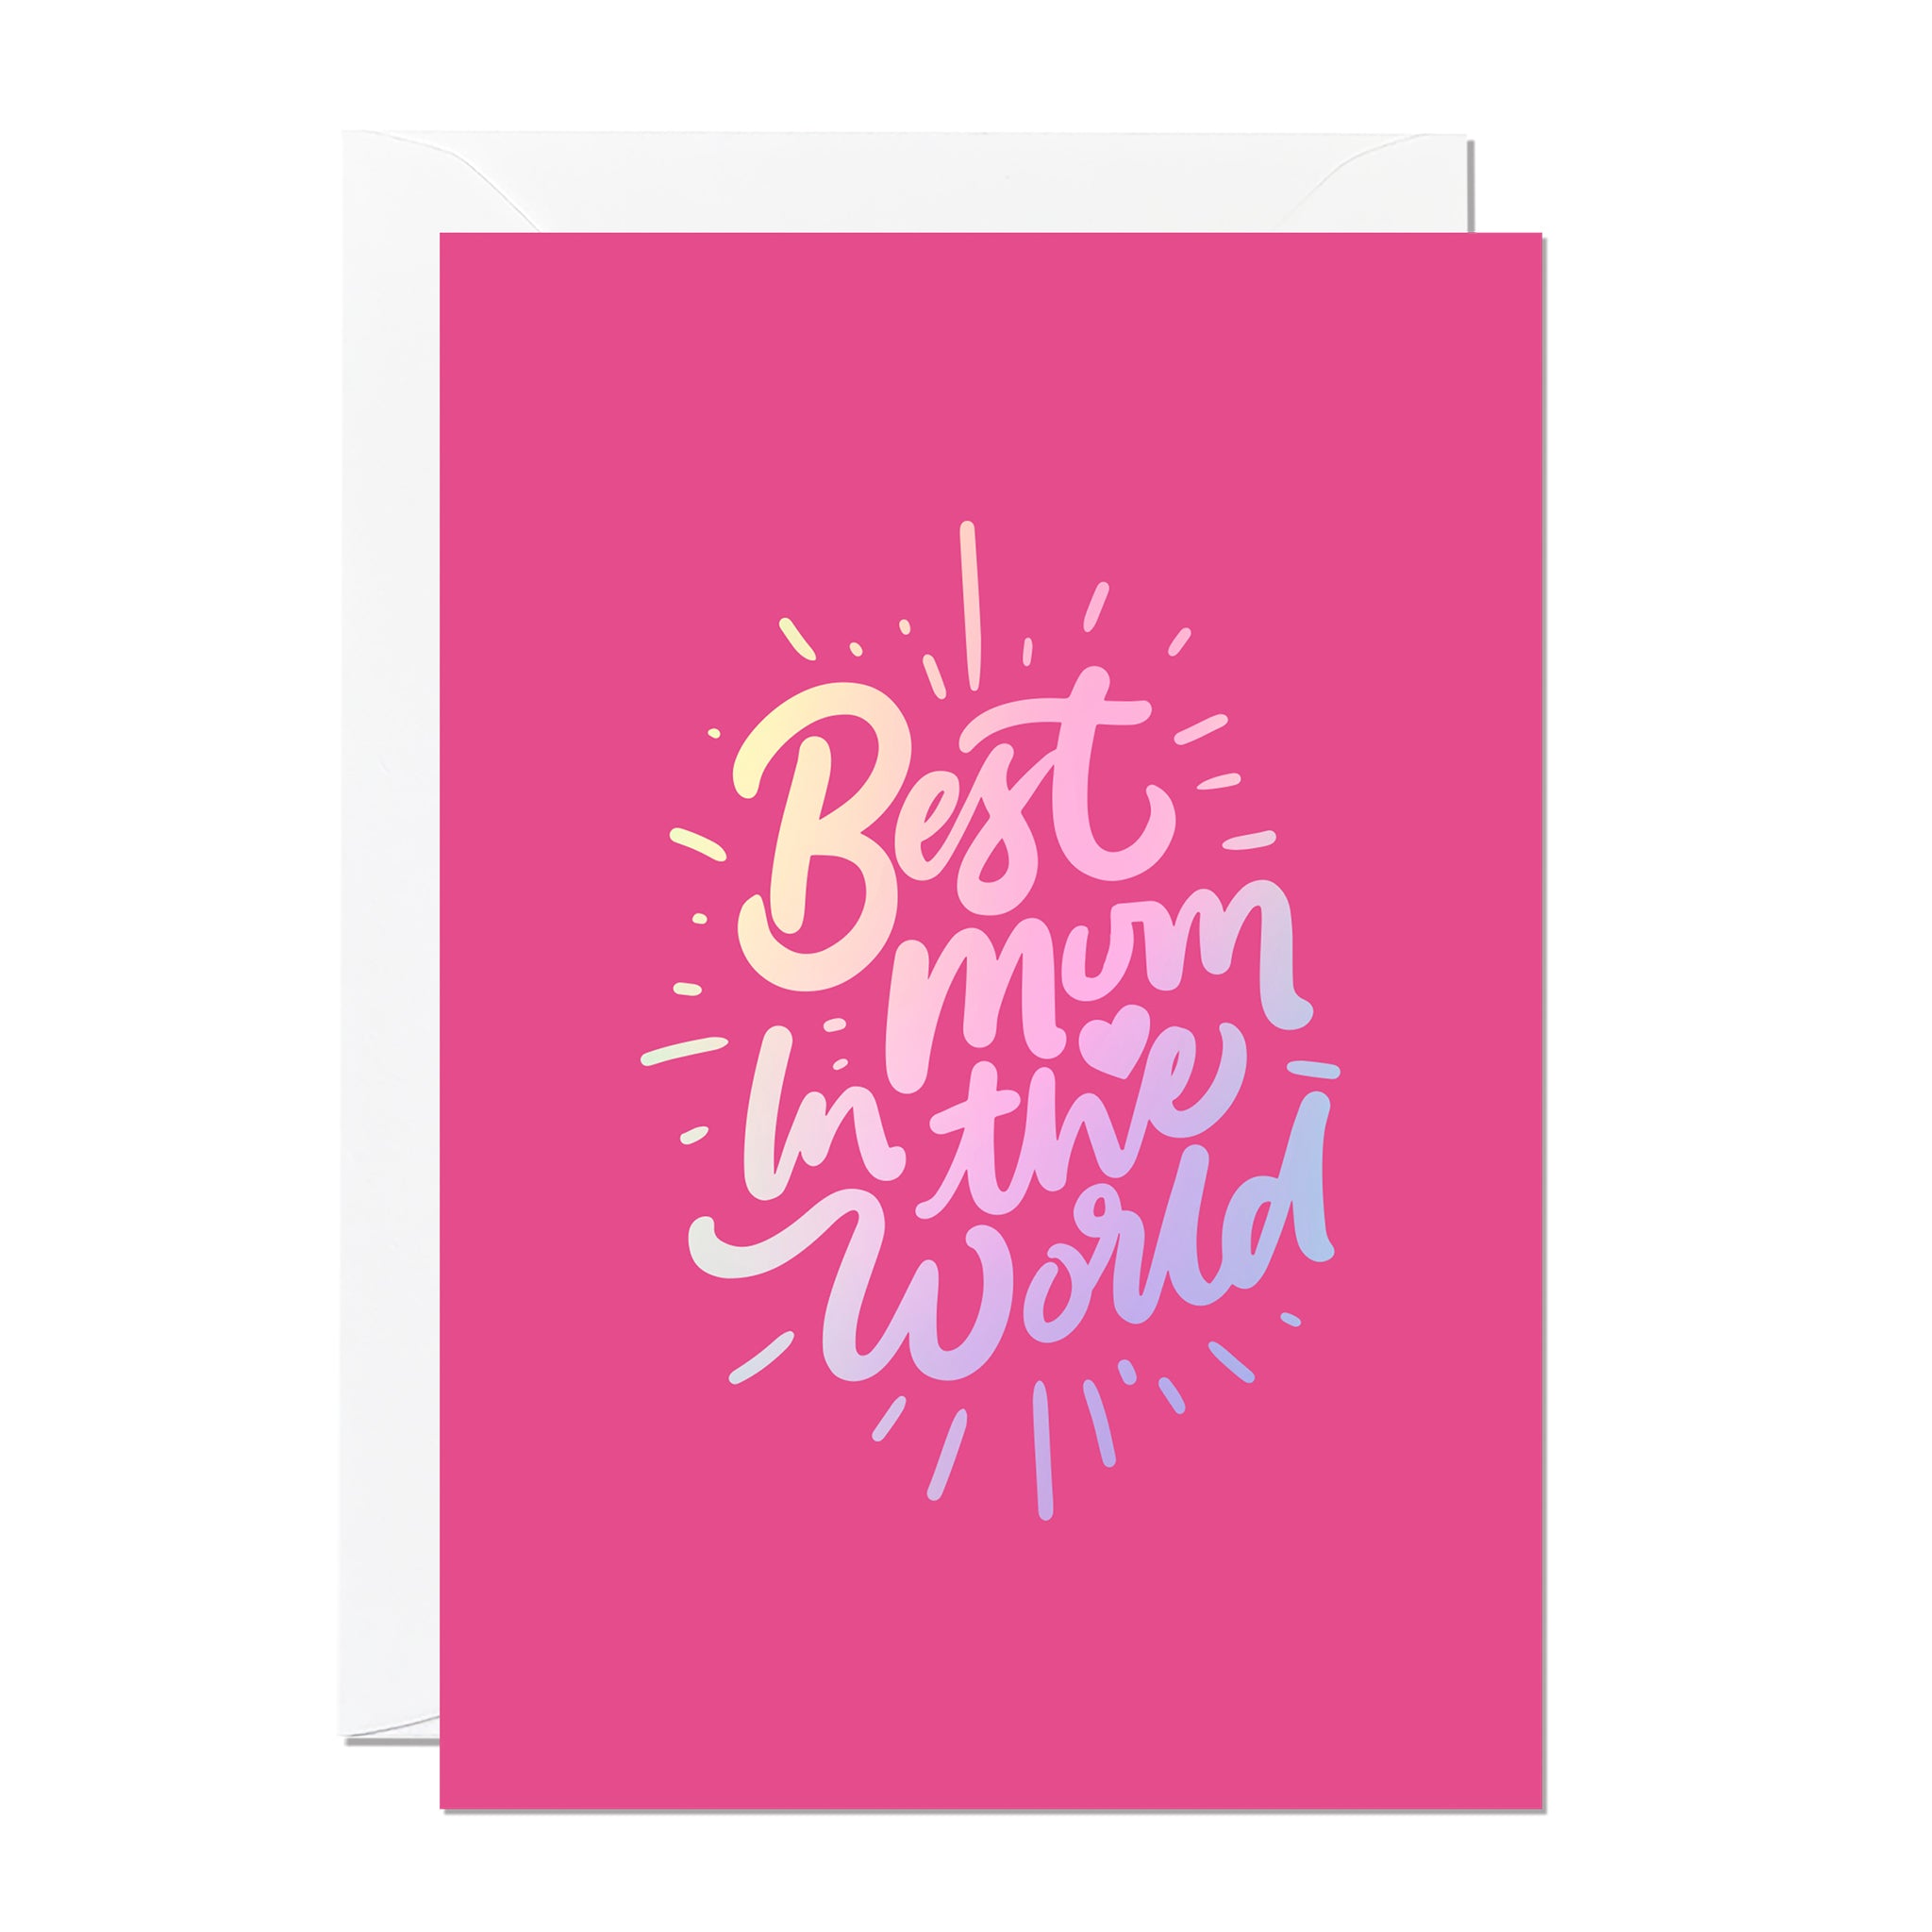 This is a Mother's Day card that says 'Best Mum in The World'. It's printed with a hot pink background and features hand lettering printed with a luxury iridescent foil